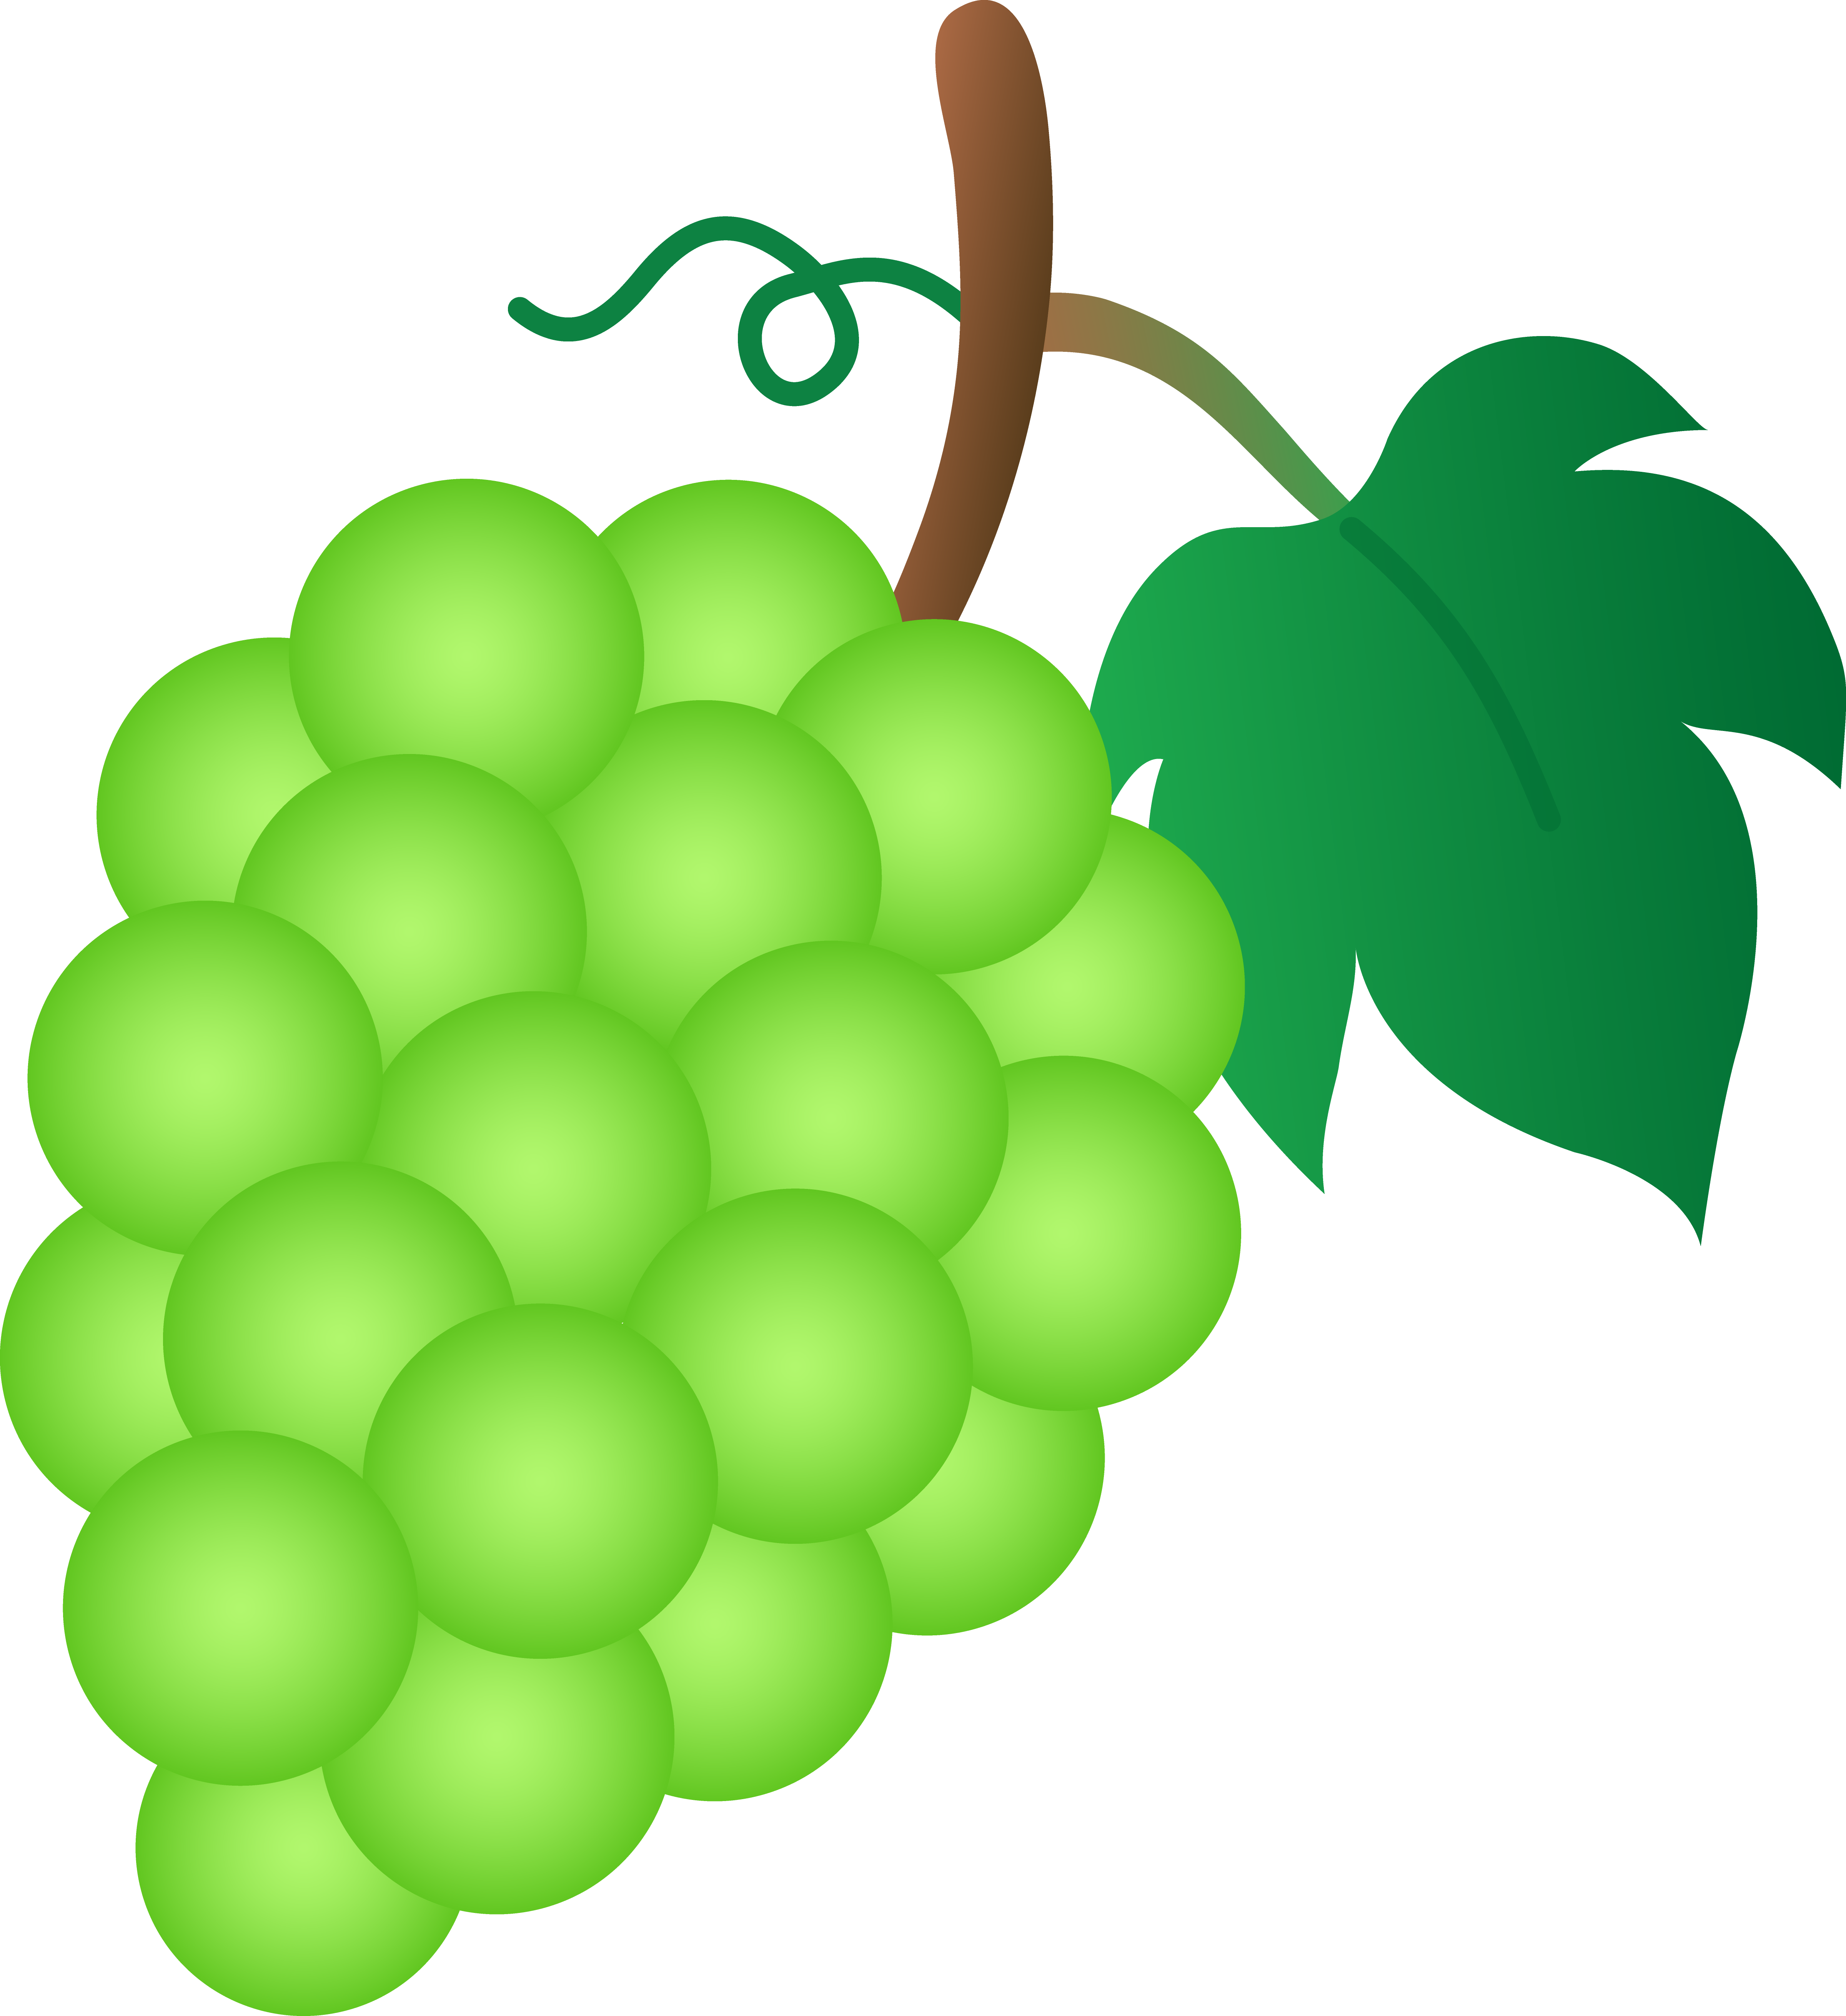 Free Grapes Images, Download Free Clip Art, Free Clip Art on.